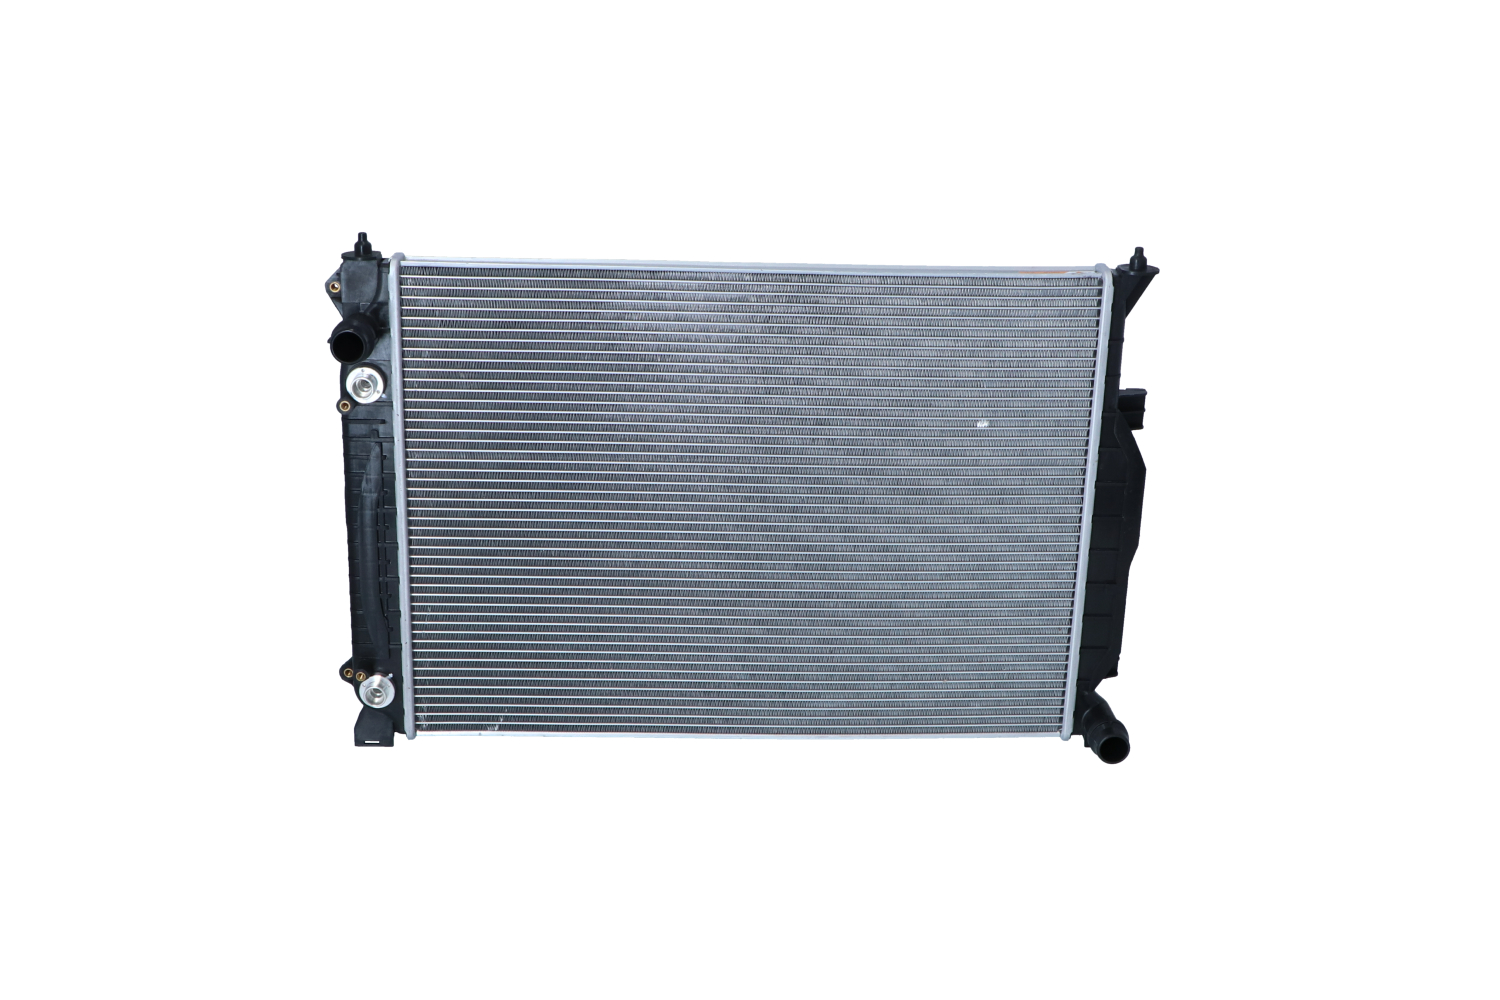 NRF EASY FIT 53444 Engine radiator Aluminium, 631 x 449 x 26 mm, with seal ring, Brazed cooling fins